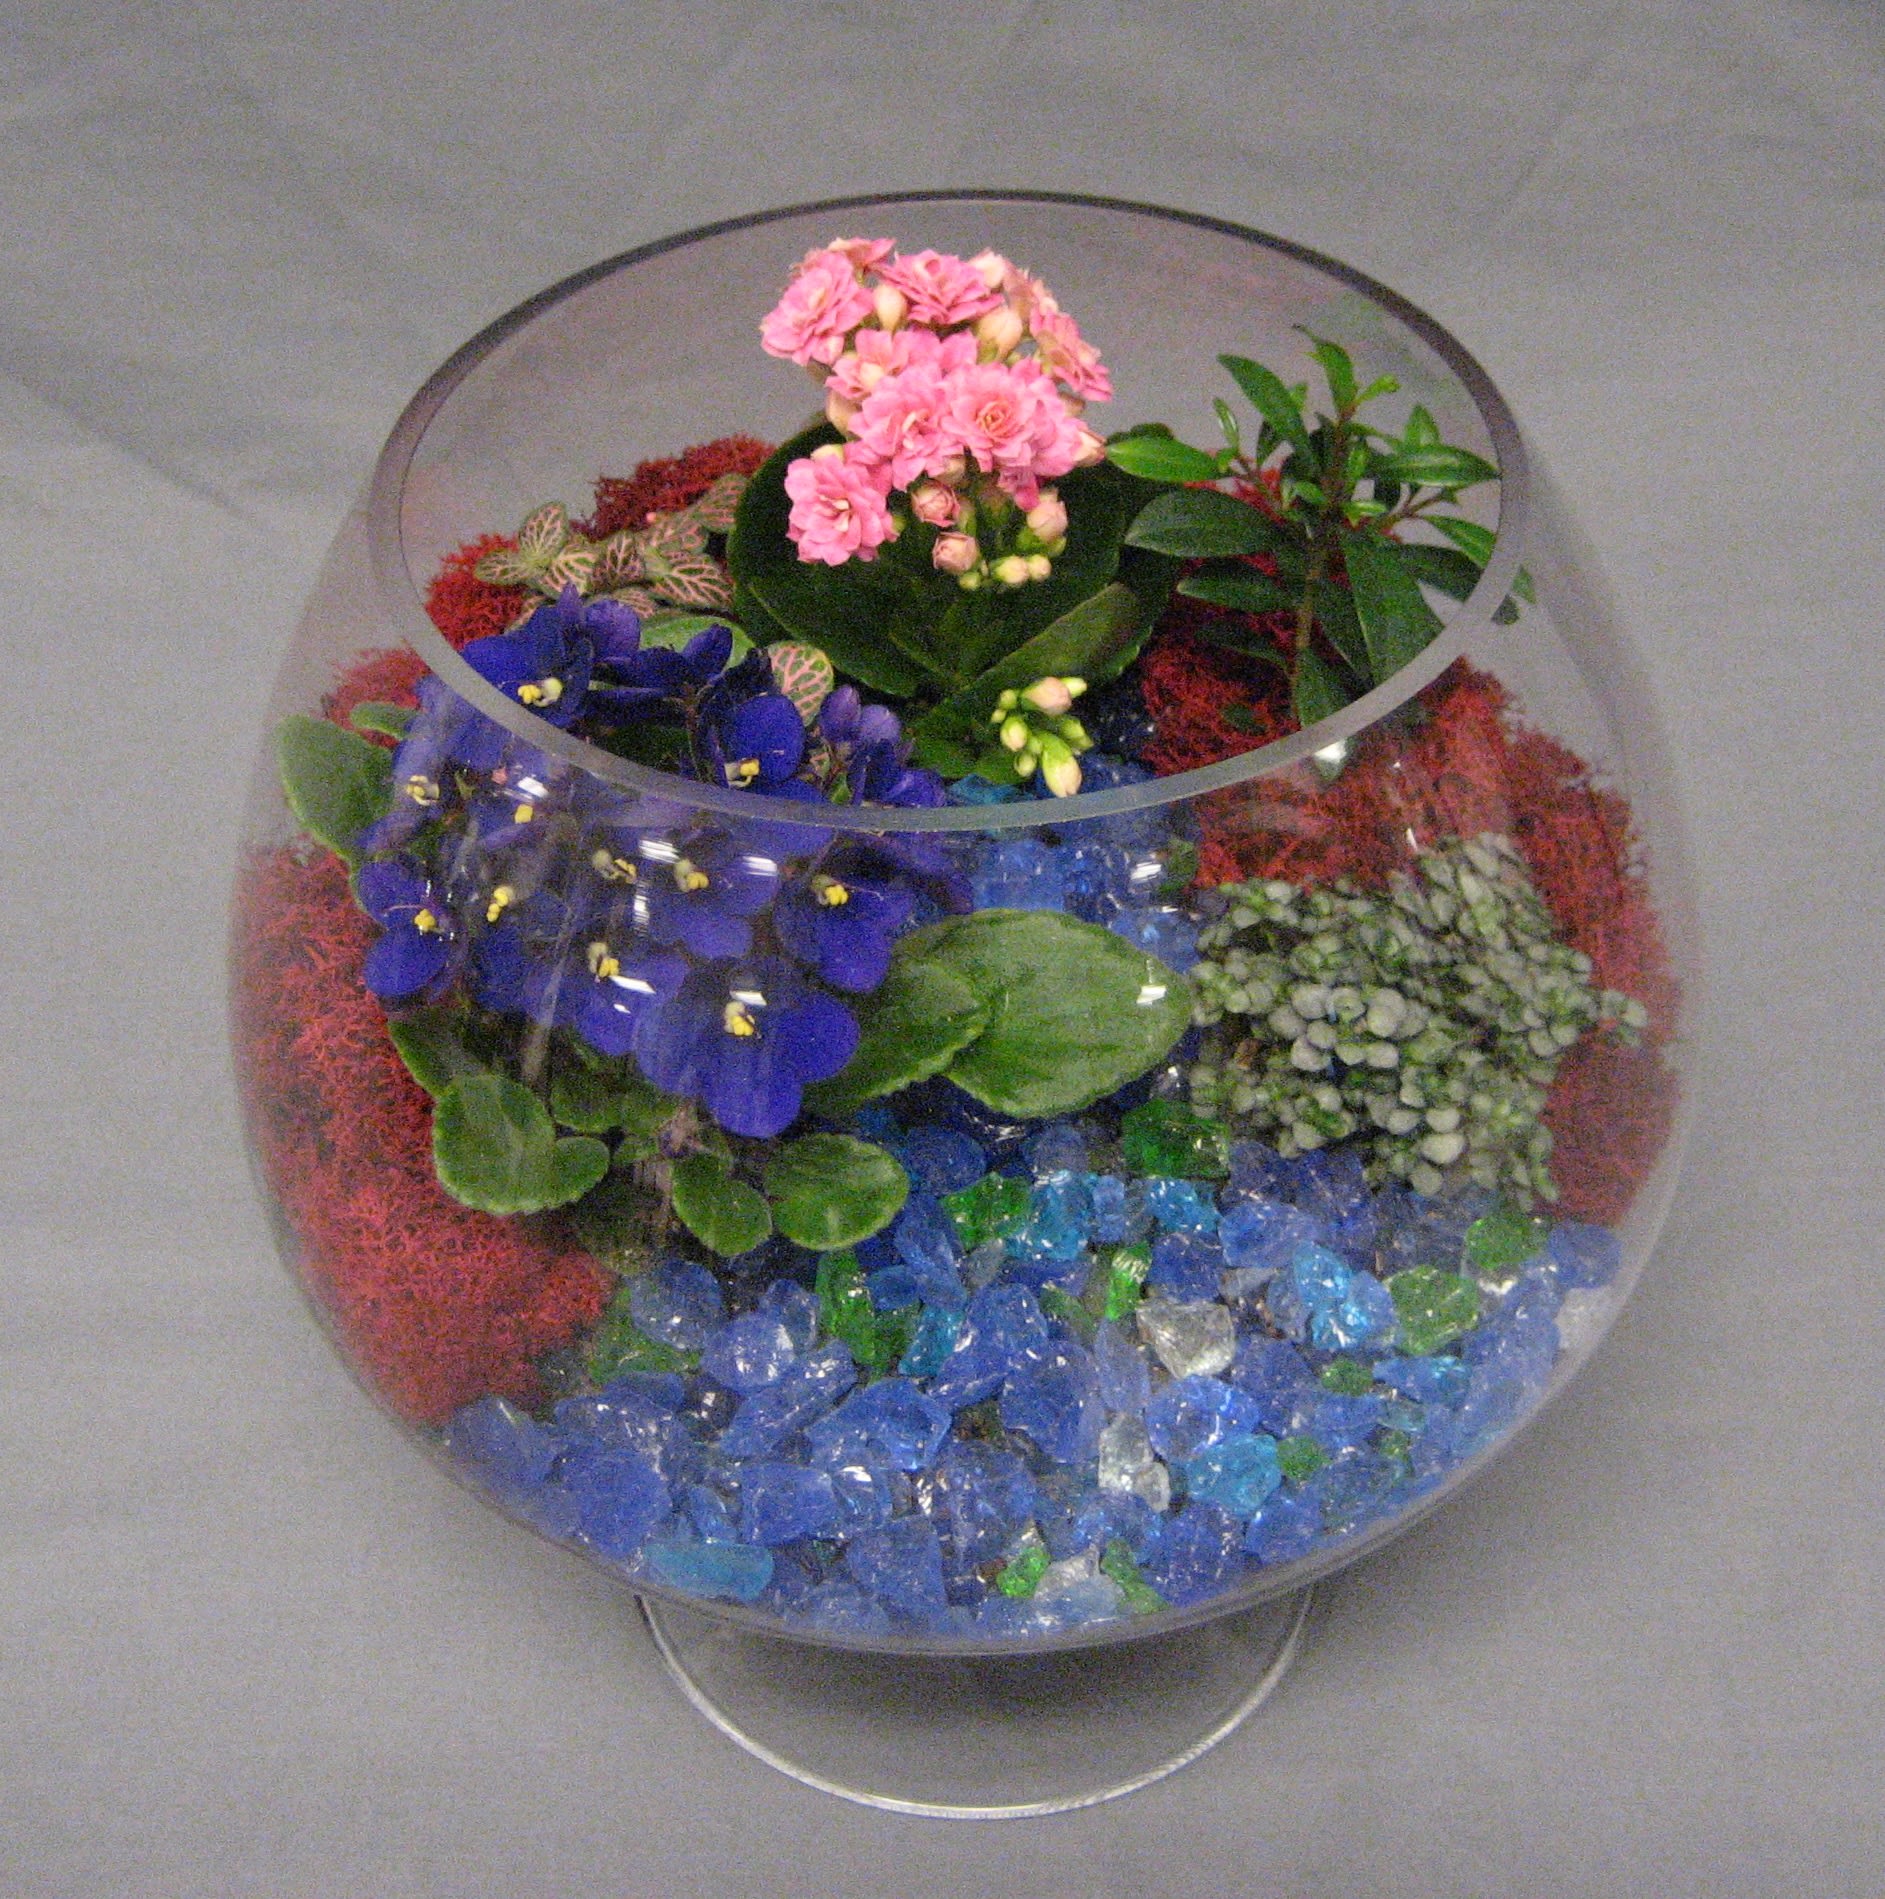 Terrarium IG-002 - Terrariums are a classic that everyone loves. Designed in a glass bowl, miniature plants, accessories, colored glass and accents finish this one-of-a-kind gift!  Garden will be designed with similar products and keepsakes to fit the recipient and the occasion.  **PLEASE NOTE: plant selection may differ from the ones pictured.